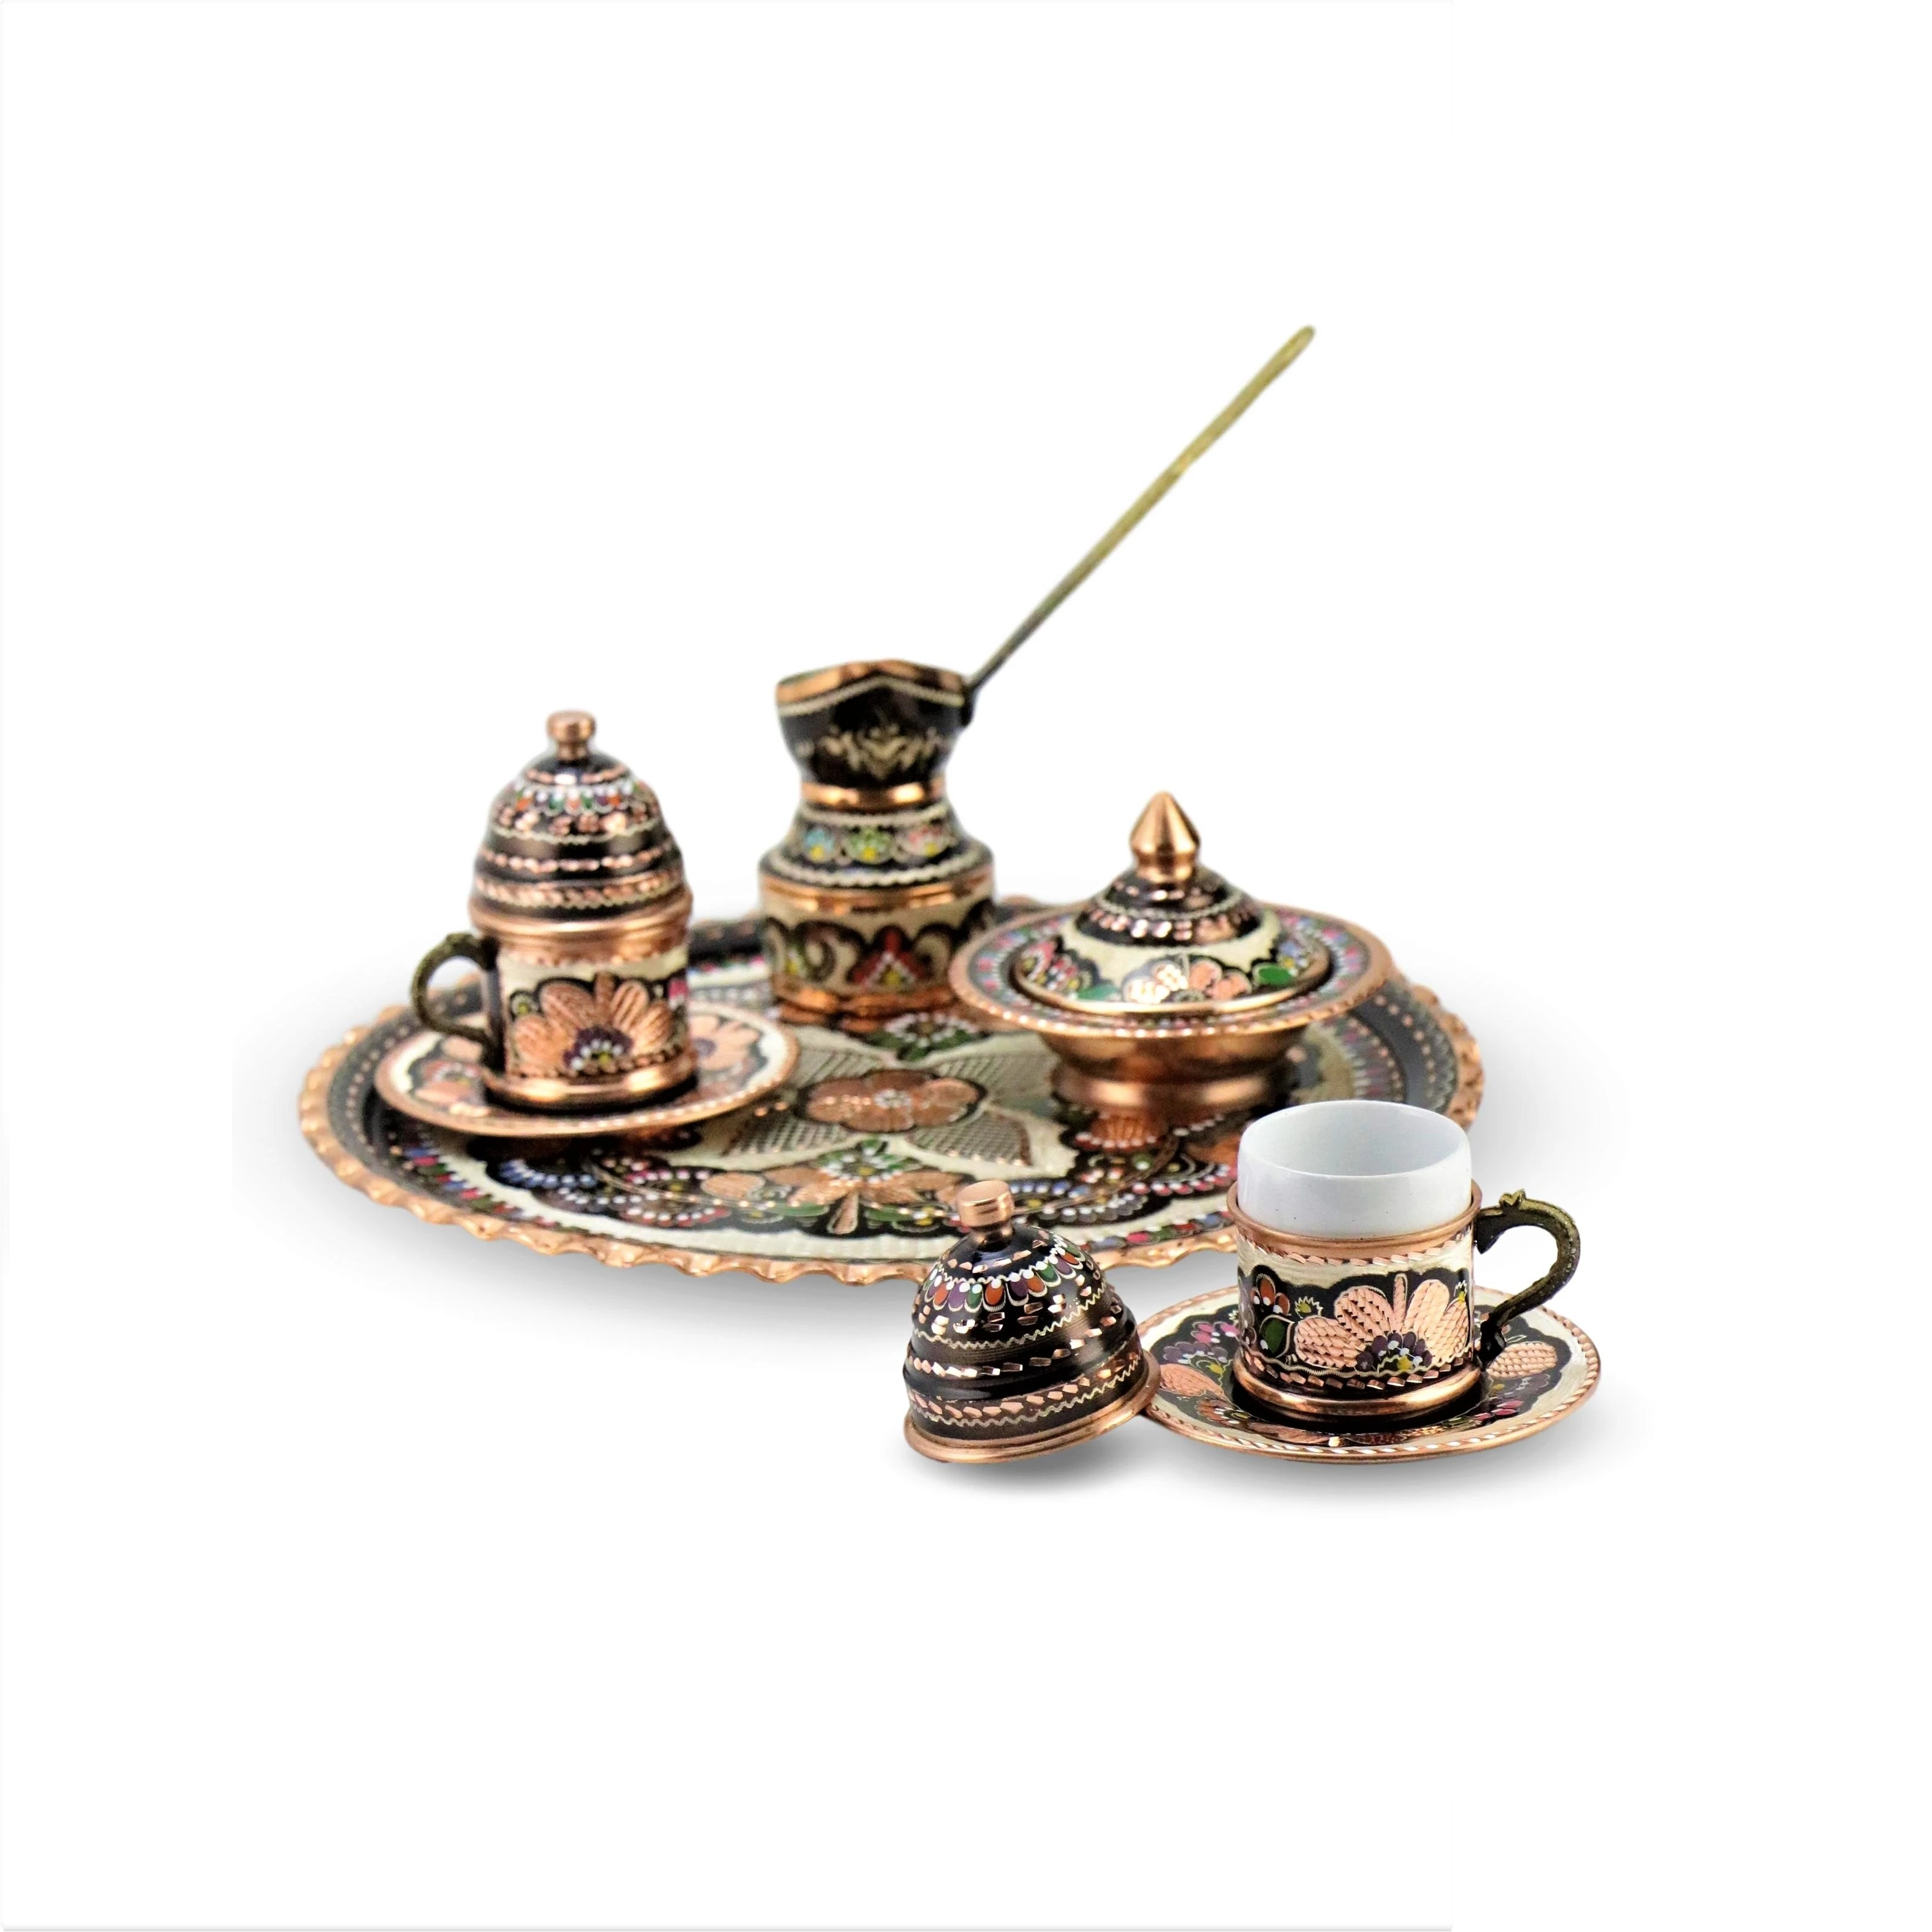 Turkish Coffee Espresso Set For With Copper Coffee Pot And Kocatepe